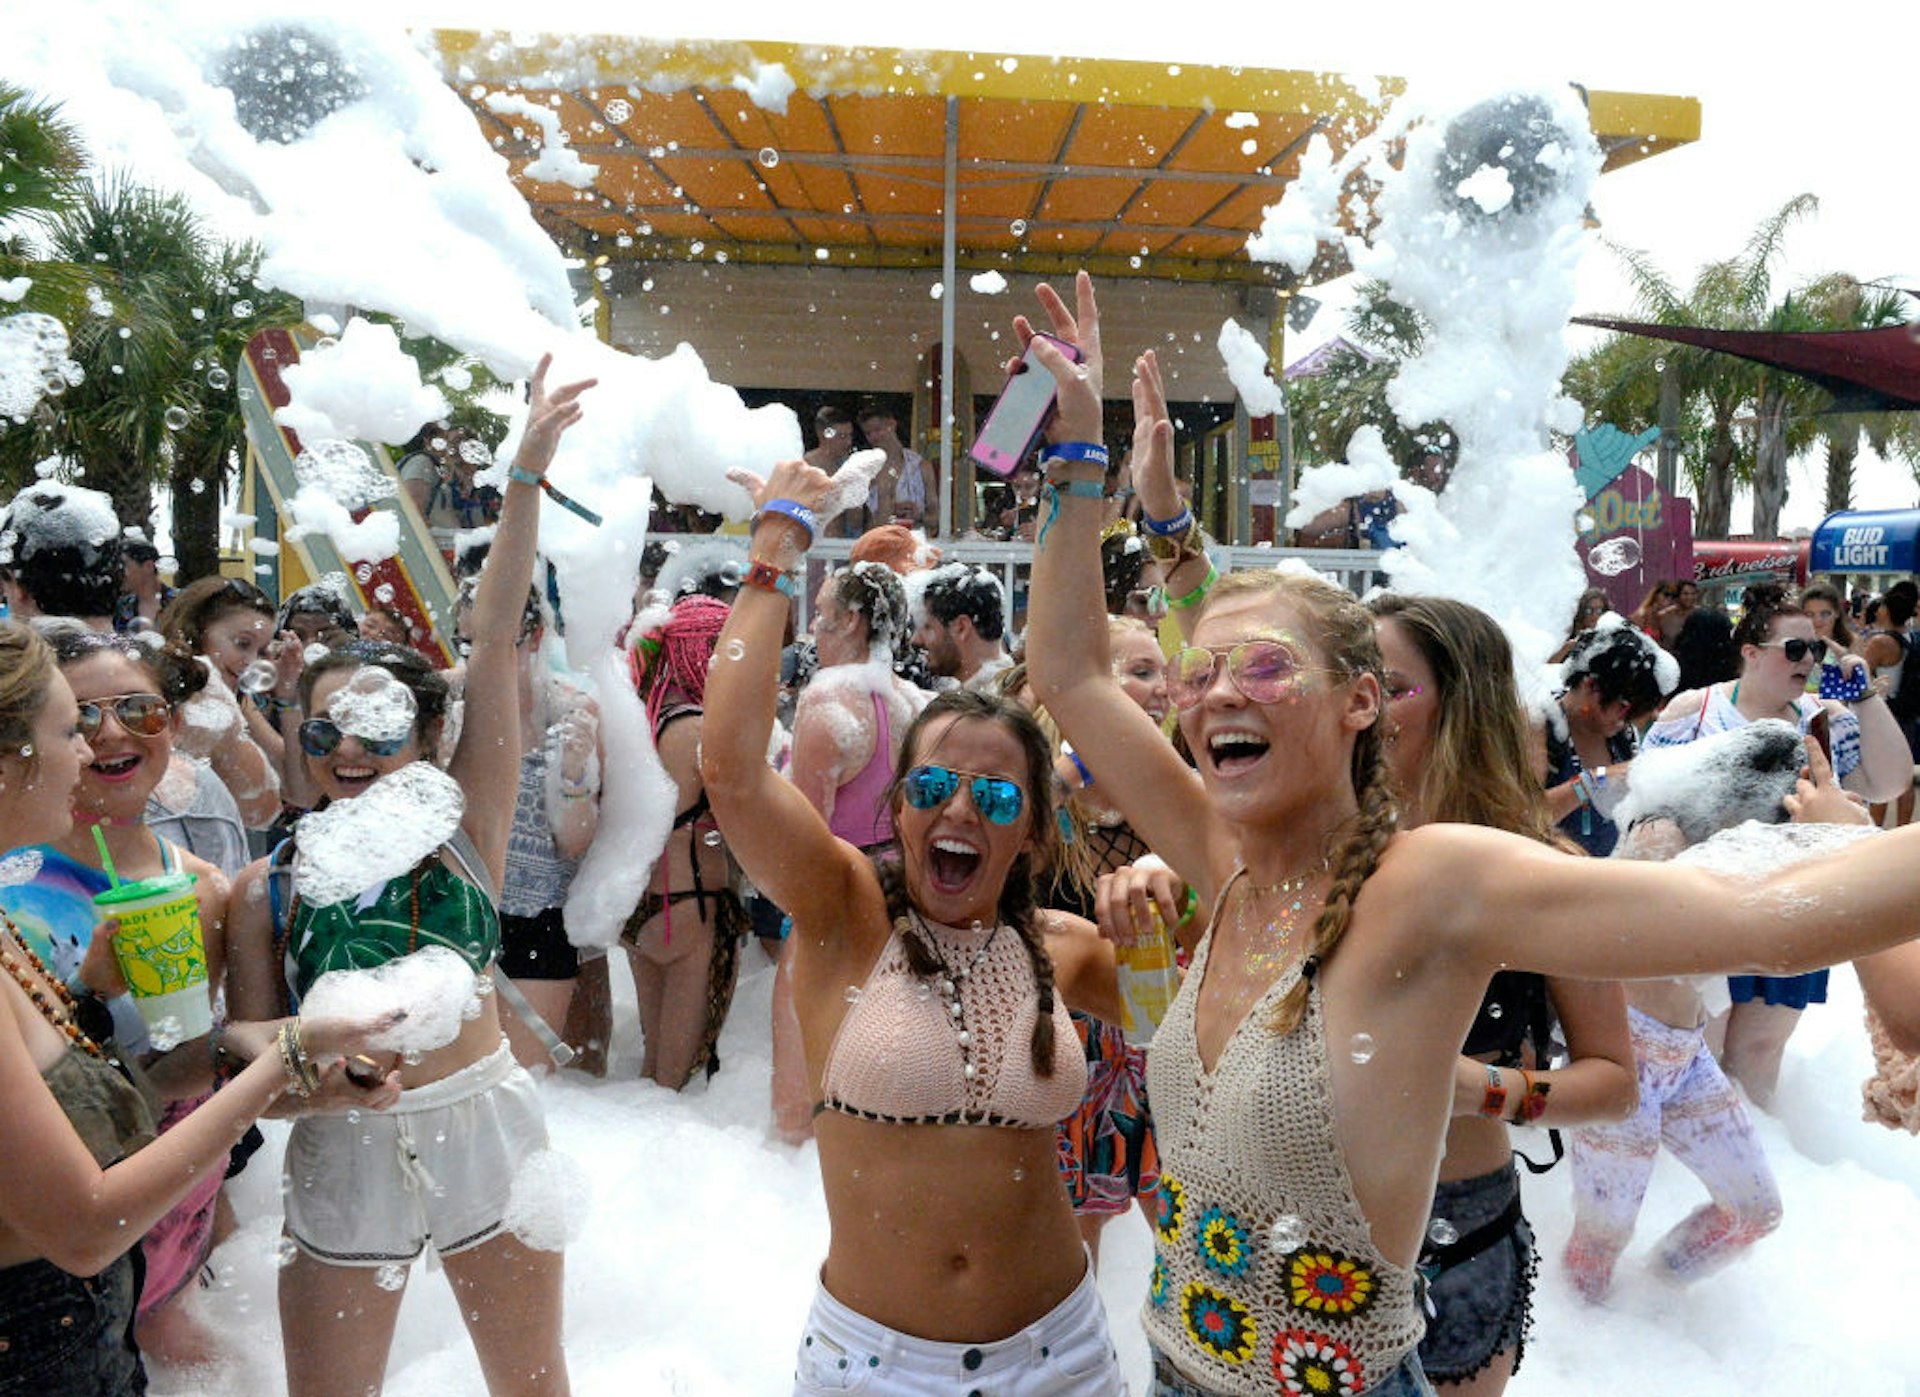 Festivalgoers party in foam at a music festival. 